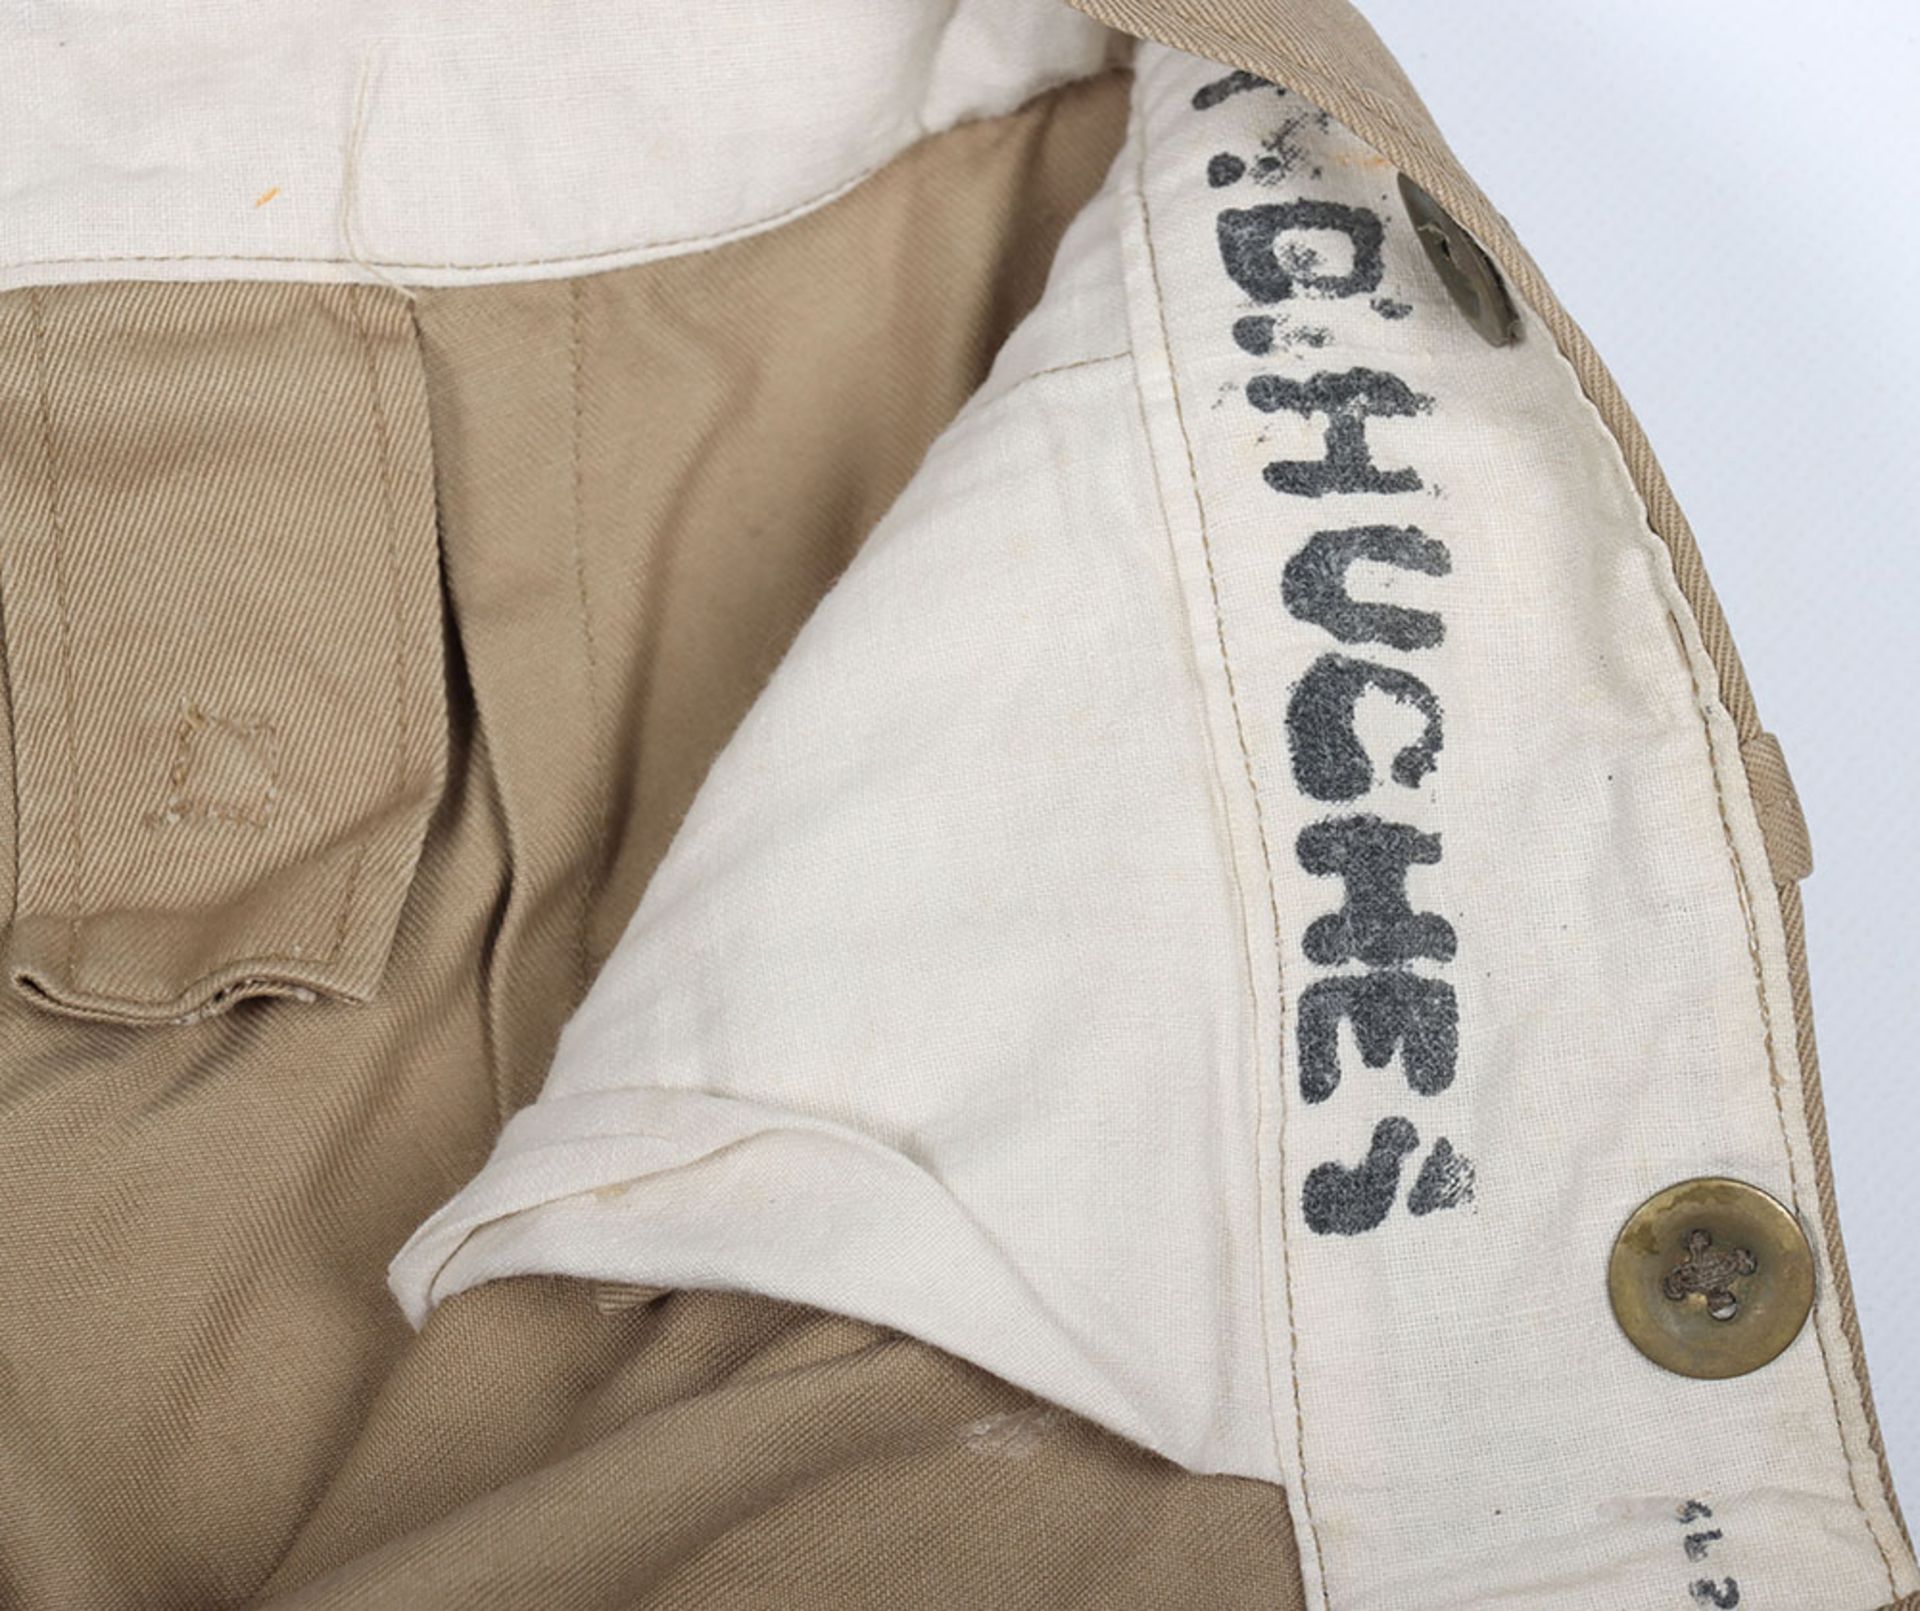 British Post War Royal Marines KD Tunic and Trousers Worn by Swimmer Canoeist T D Hughes During his - Image 15 of 15